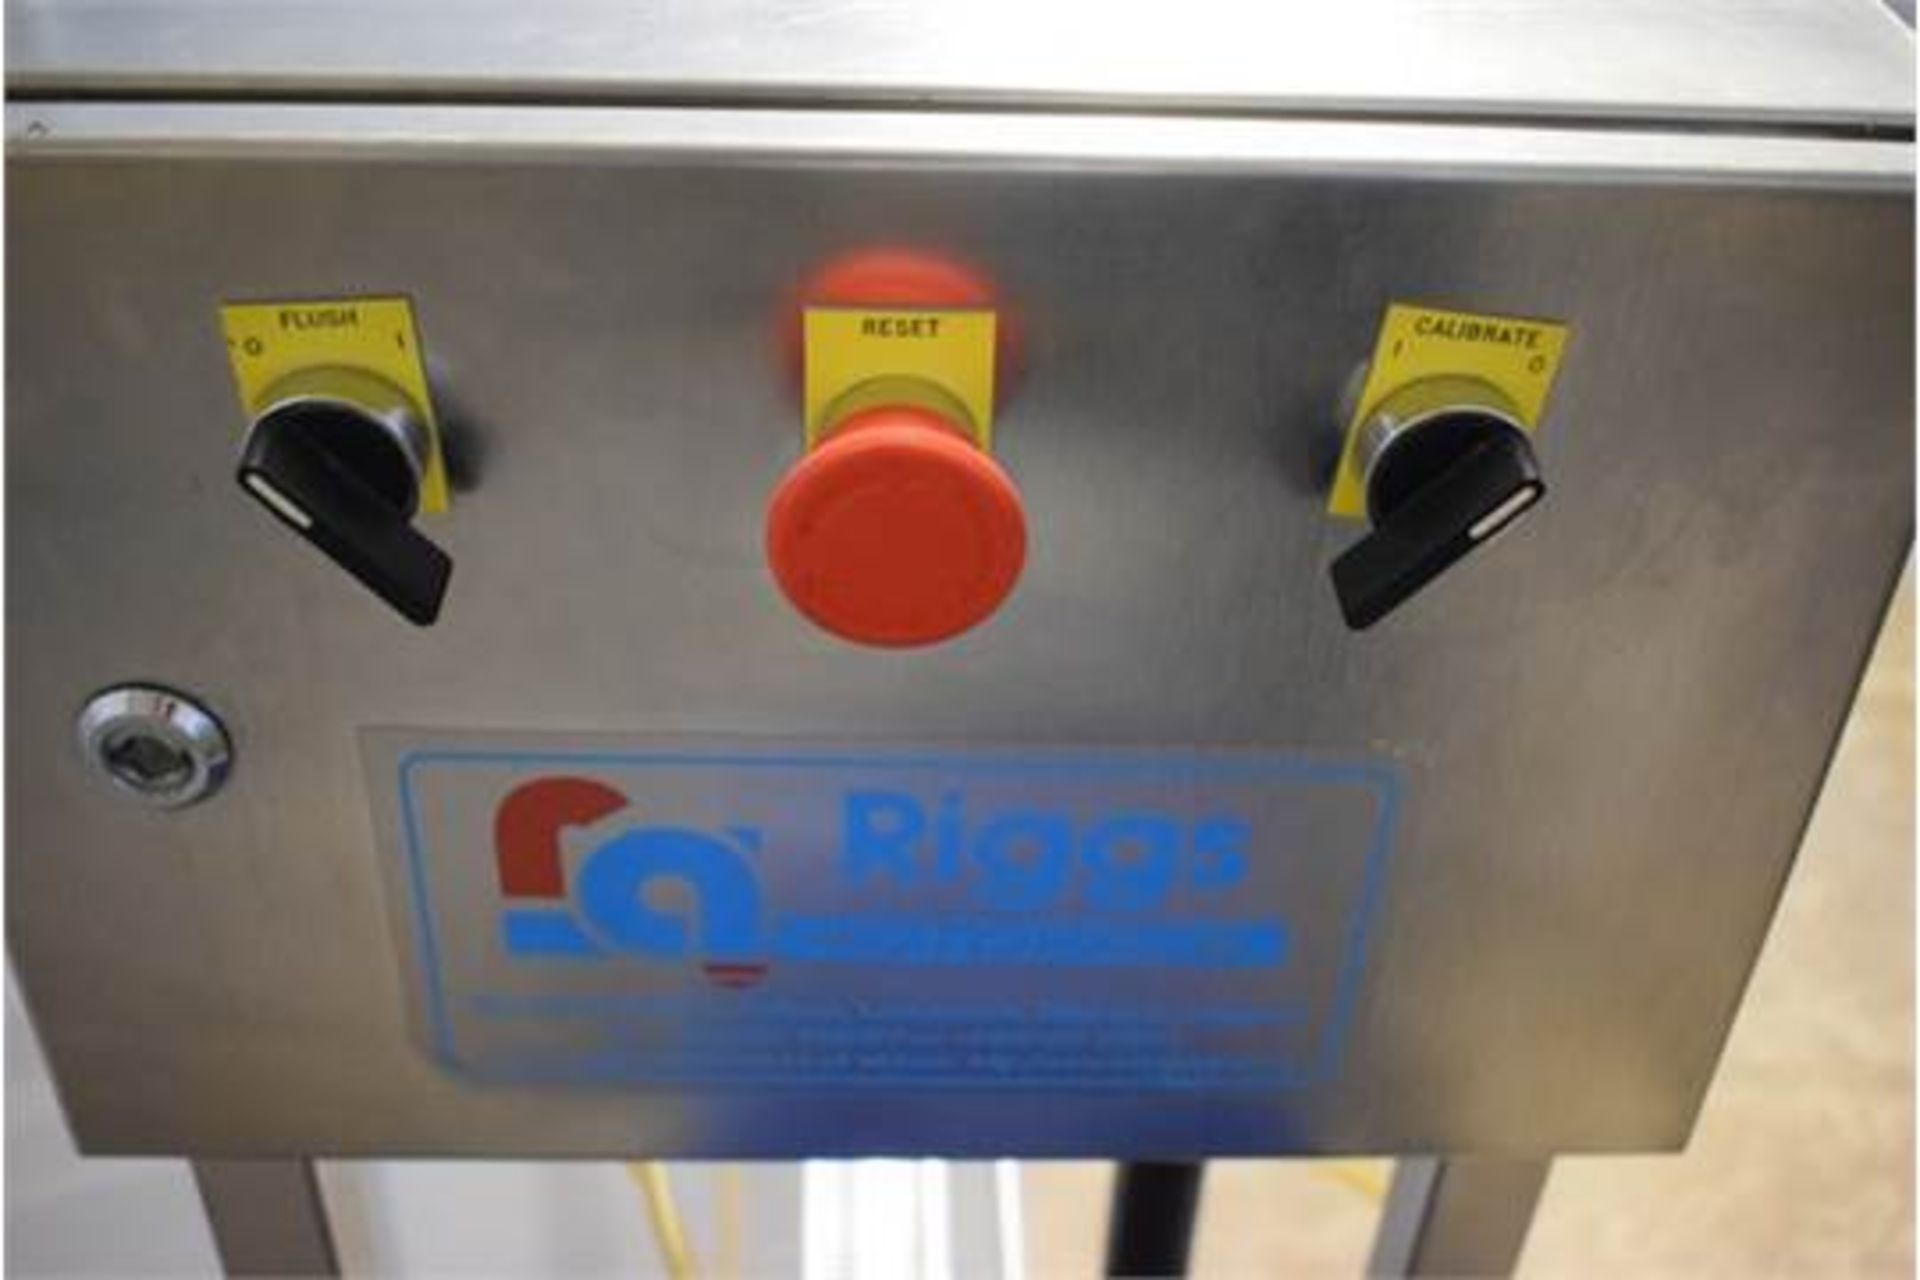 Riggs Autopack 1000 Single Head Depositor _x00D_ Model 1000 175ml Deposit_x00D_ Ideal for filling of - Image 2 of 5